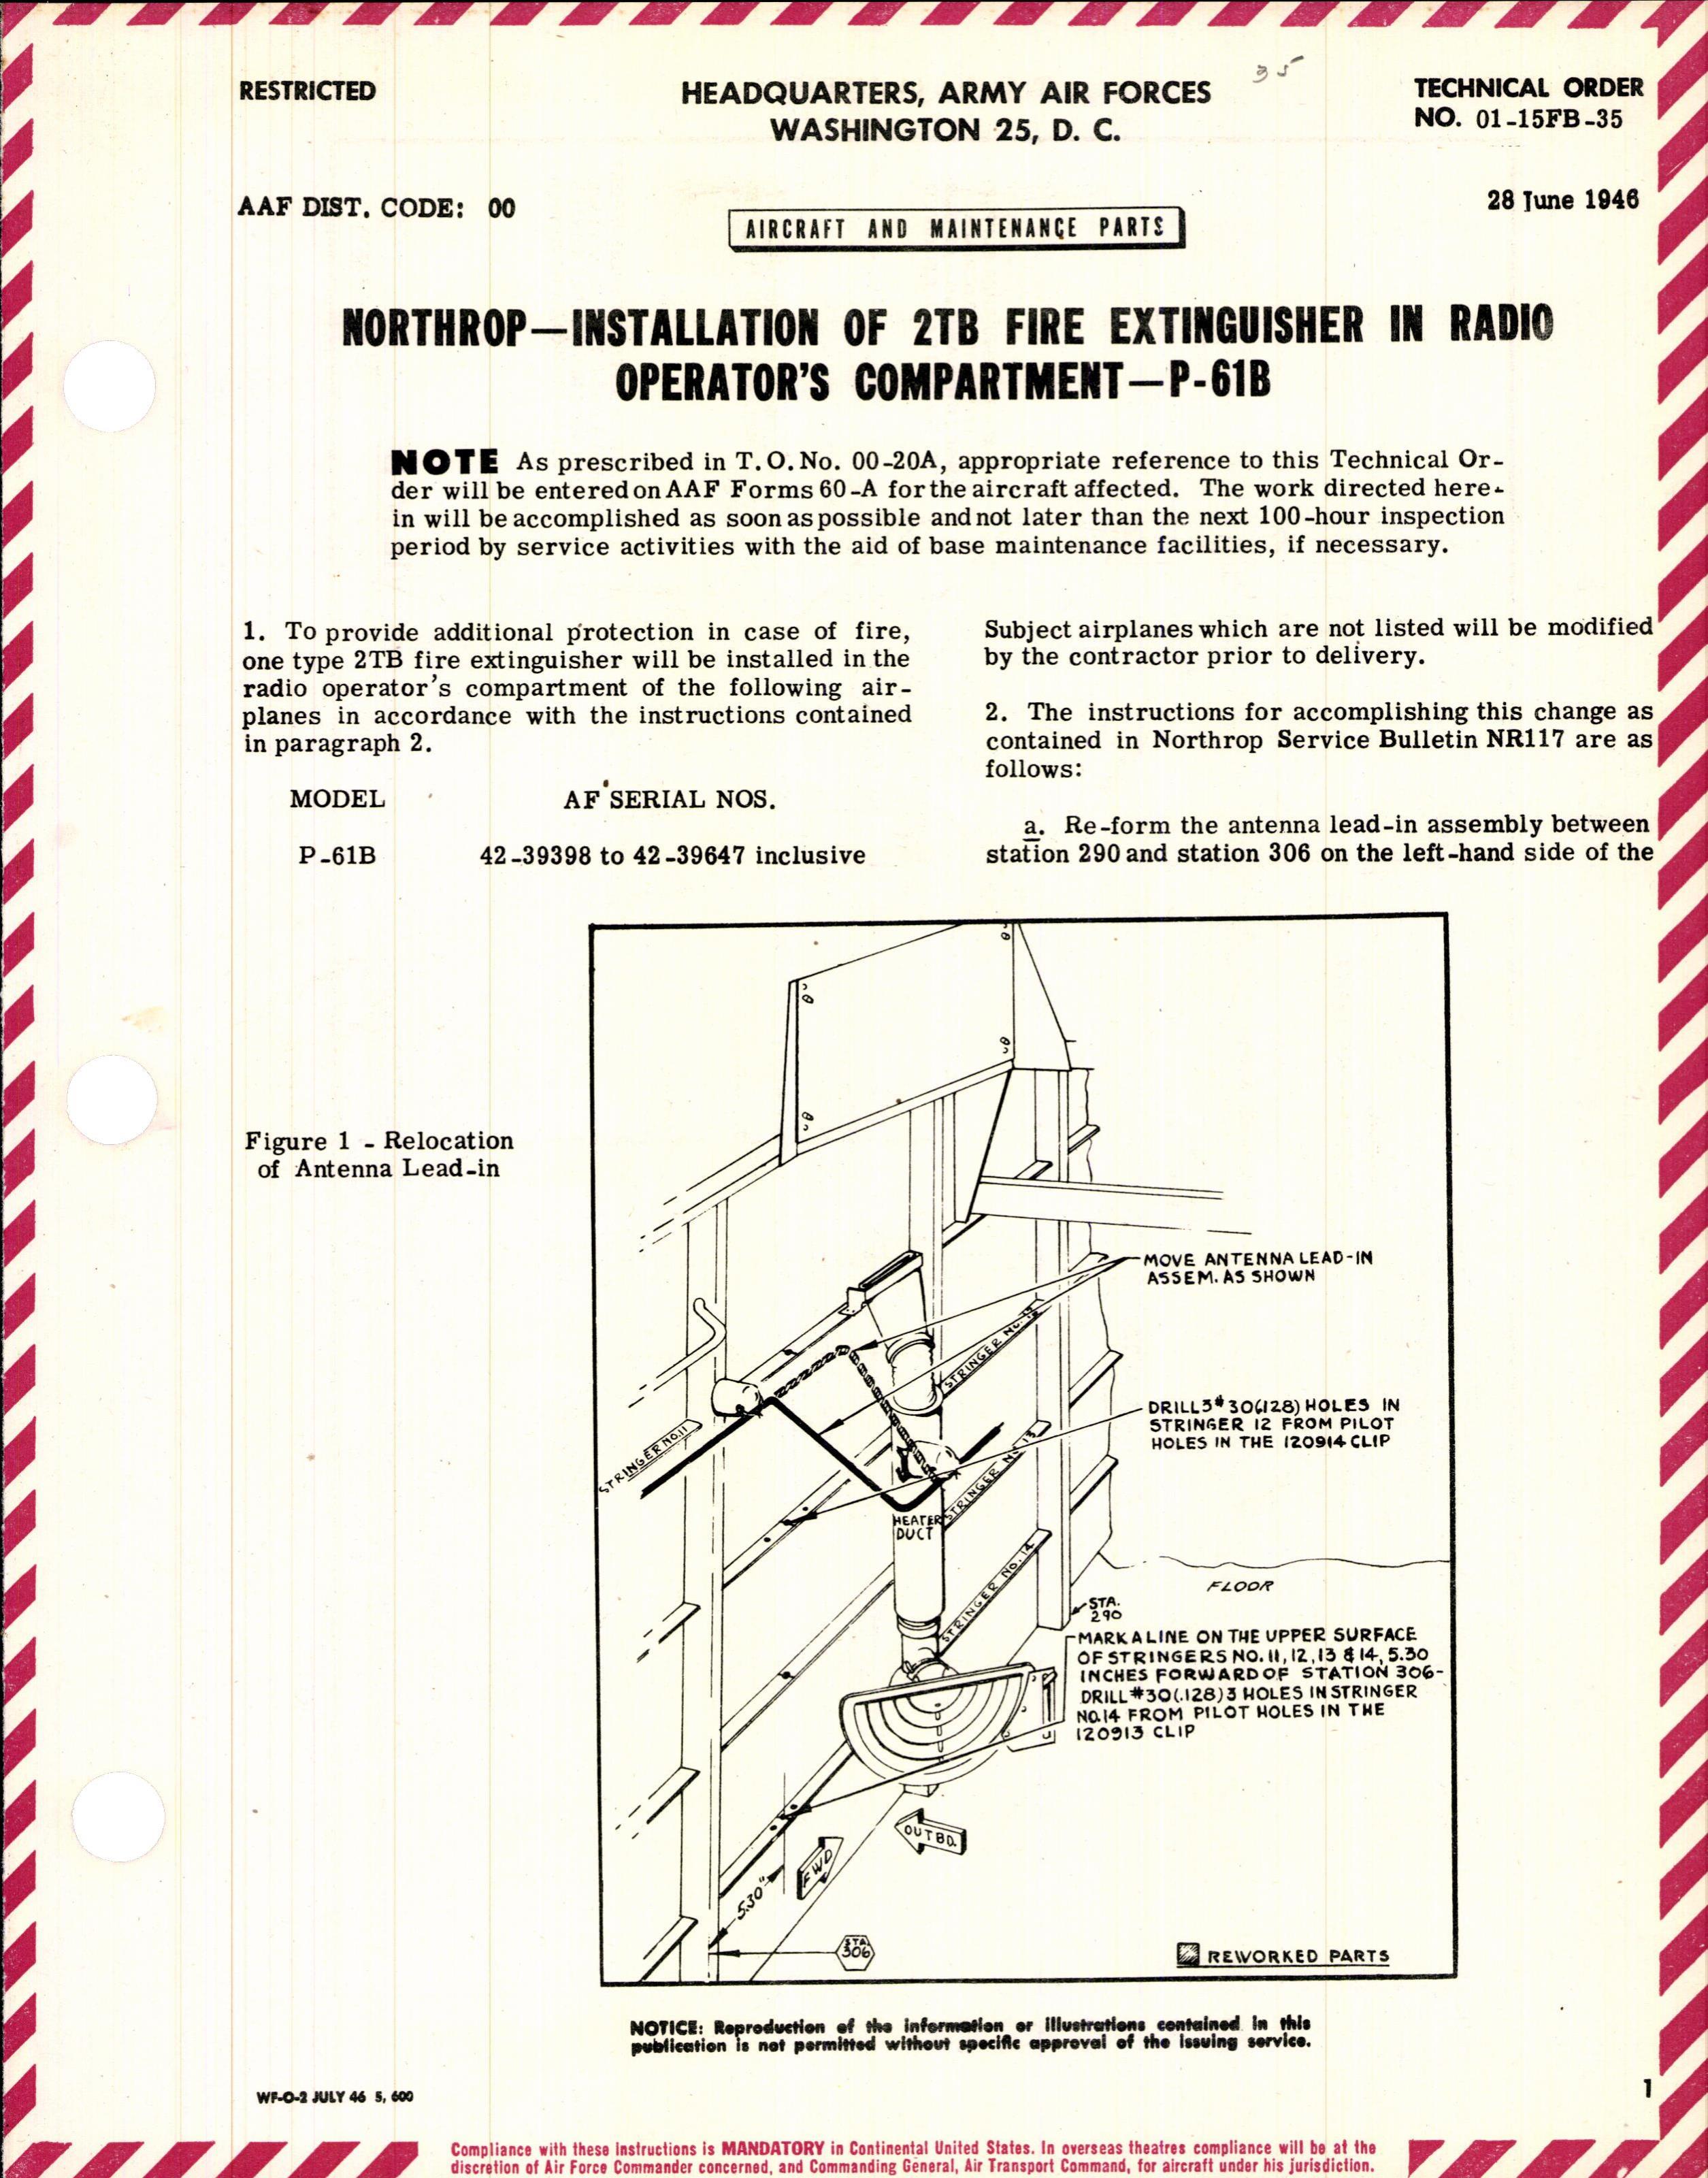 Sample page 1 from AirCorps Library document: Installation of 2TB Fire Extinguisher in Radio Operator's Compartment for P-61B